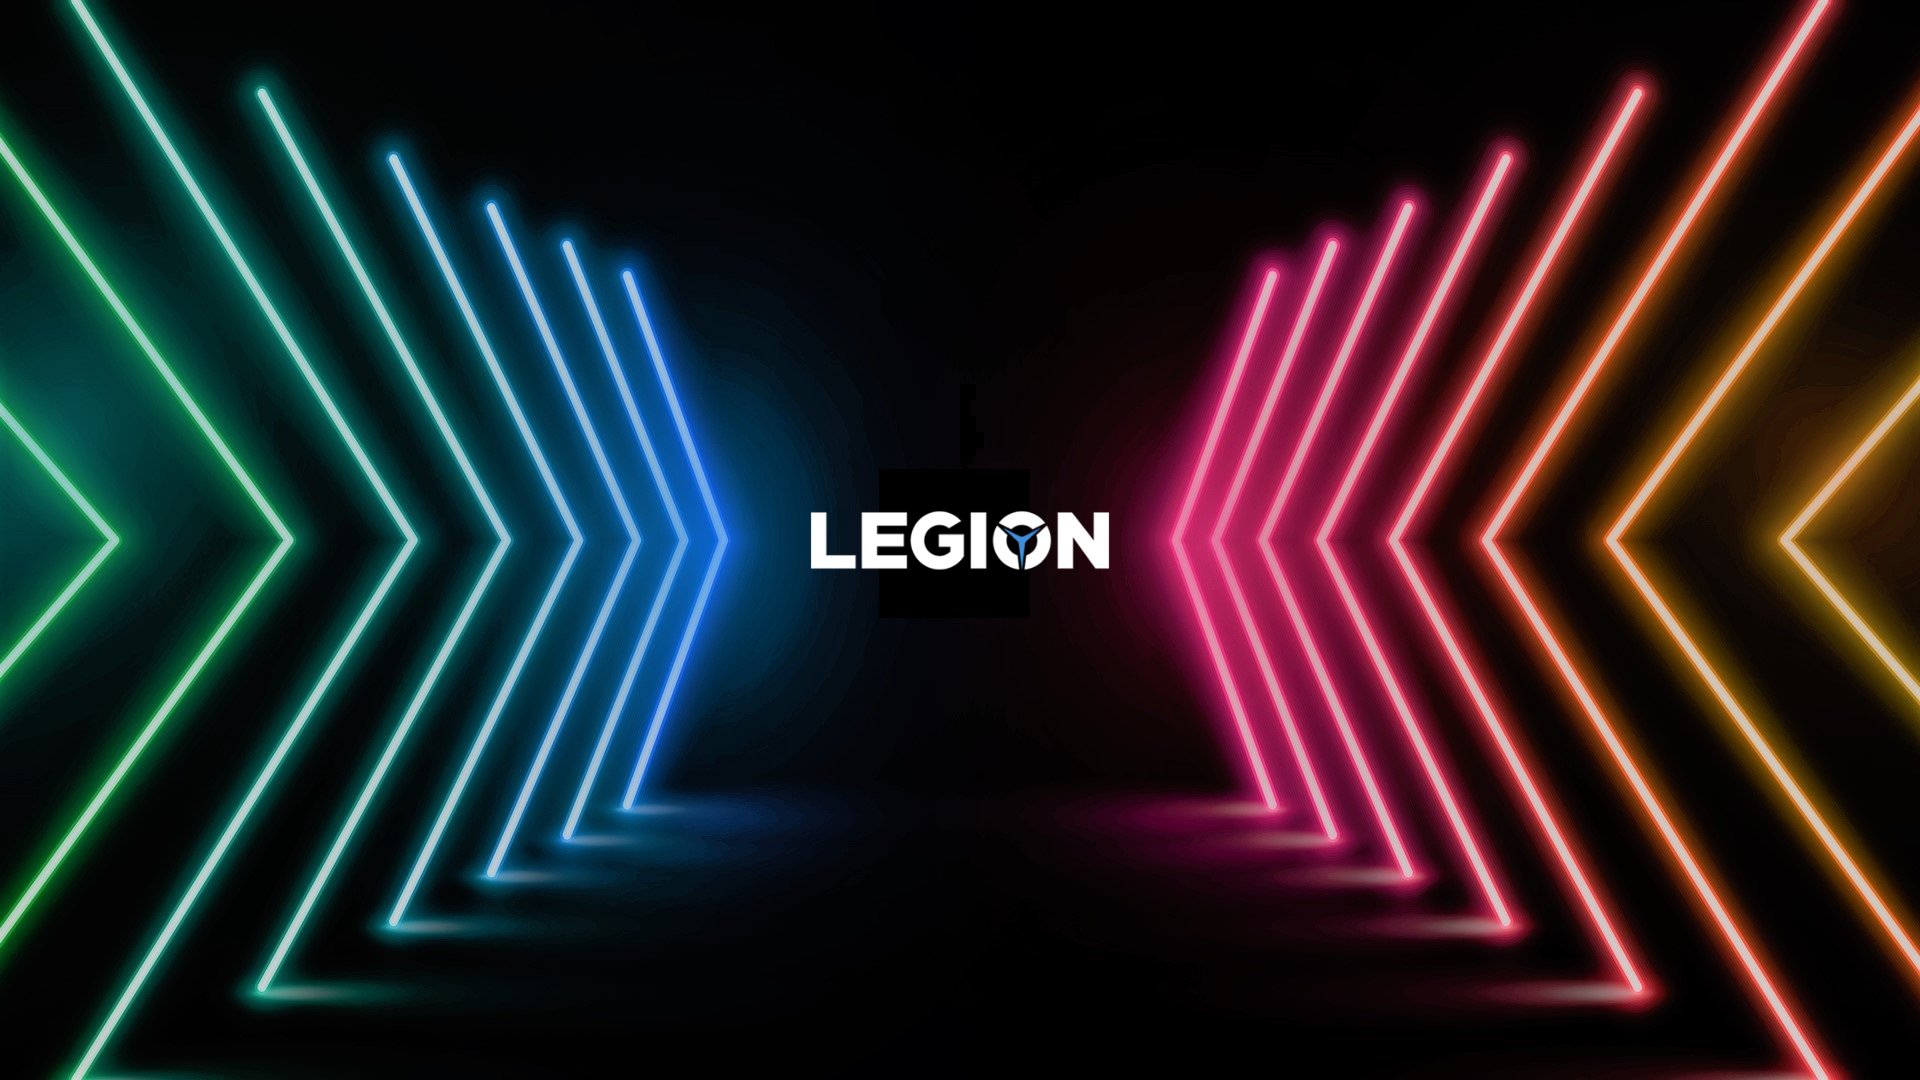 Loved the Razer Neon Wallpaper, so created my own for Legion [1920x1080]